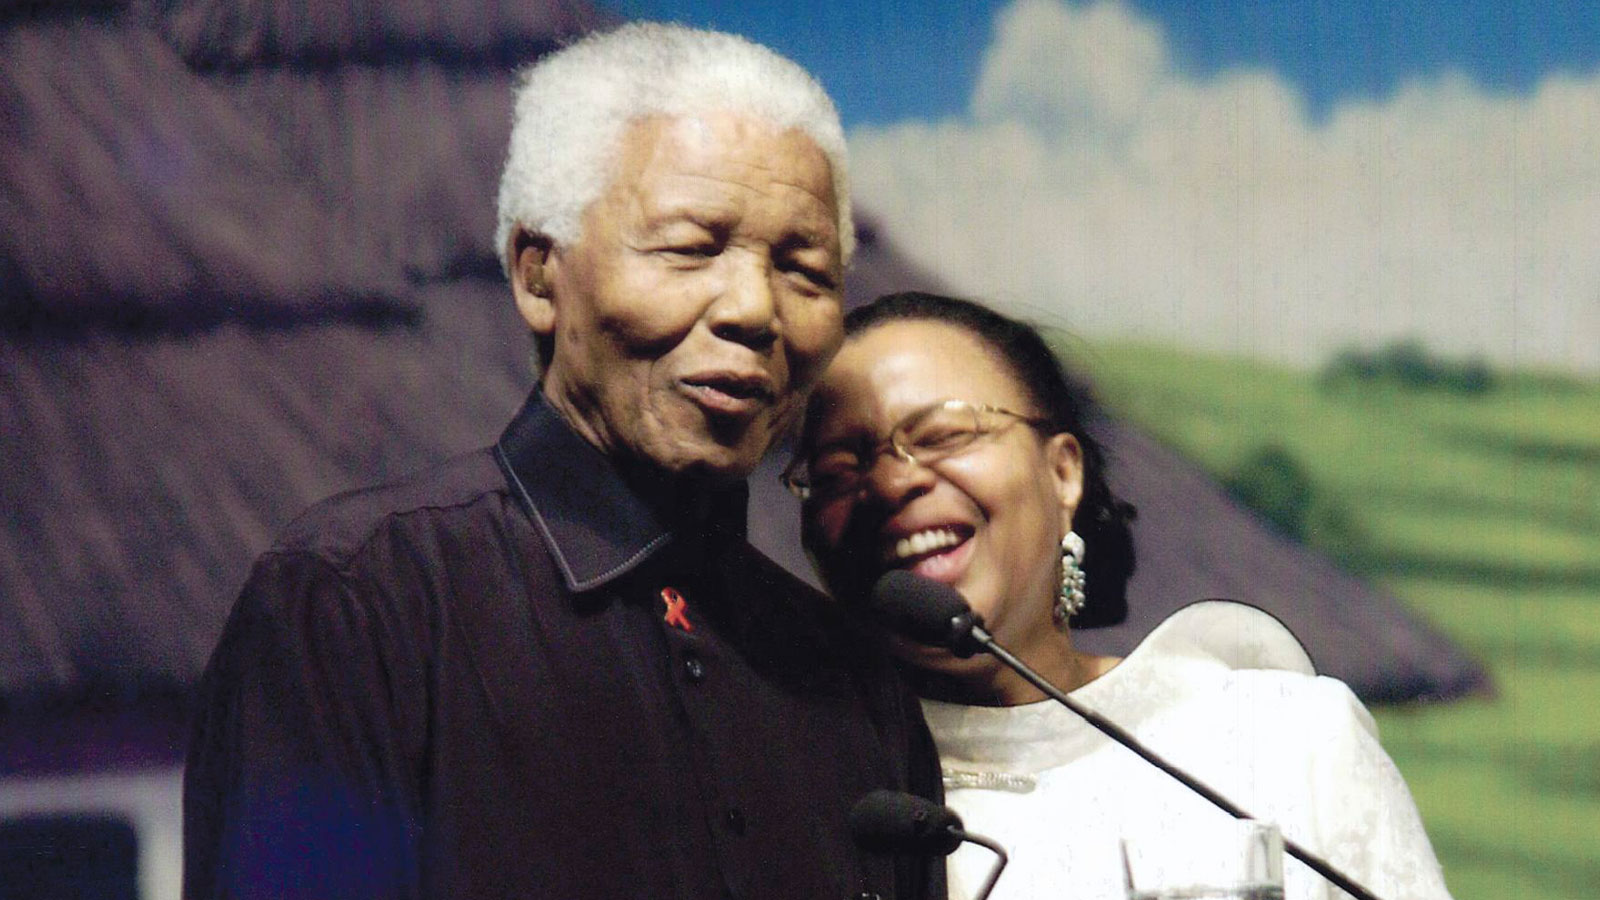 Mandela alongside Graça Machel at his 85th birthday party. "We had never done anything of this scale before," said Dr. Mandela of the event. "There were 500 people in that room and it took us a year to organize. We wanted to give my father a nice thank you gift for everything that he had done for us and wanted him to know that he was loved and appreciated by all of us.